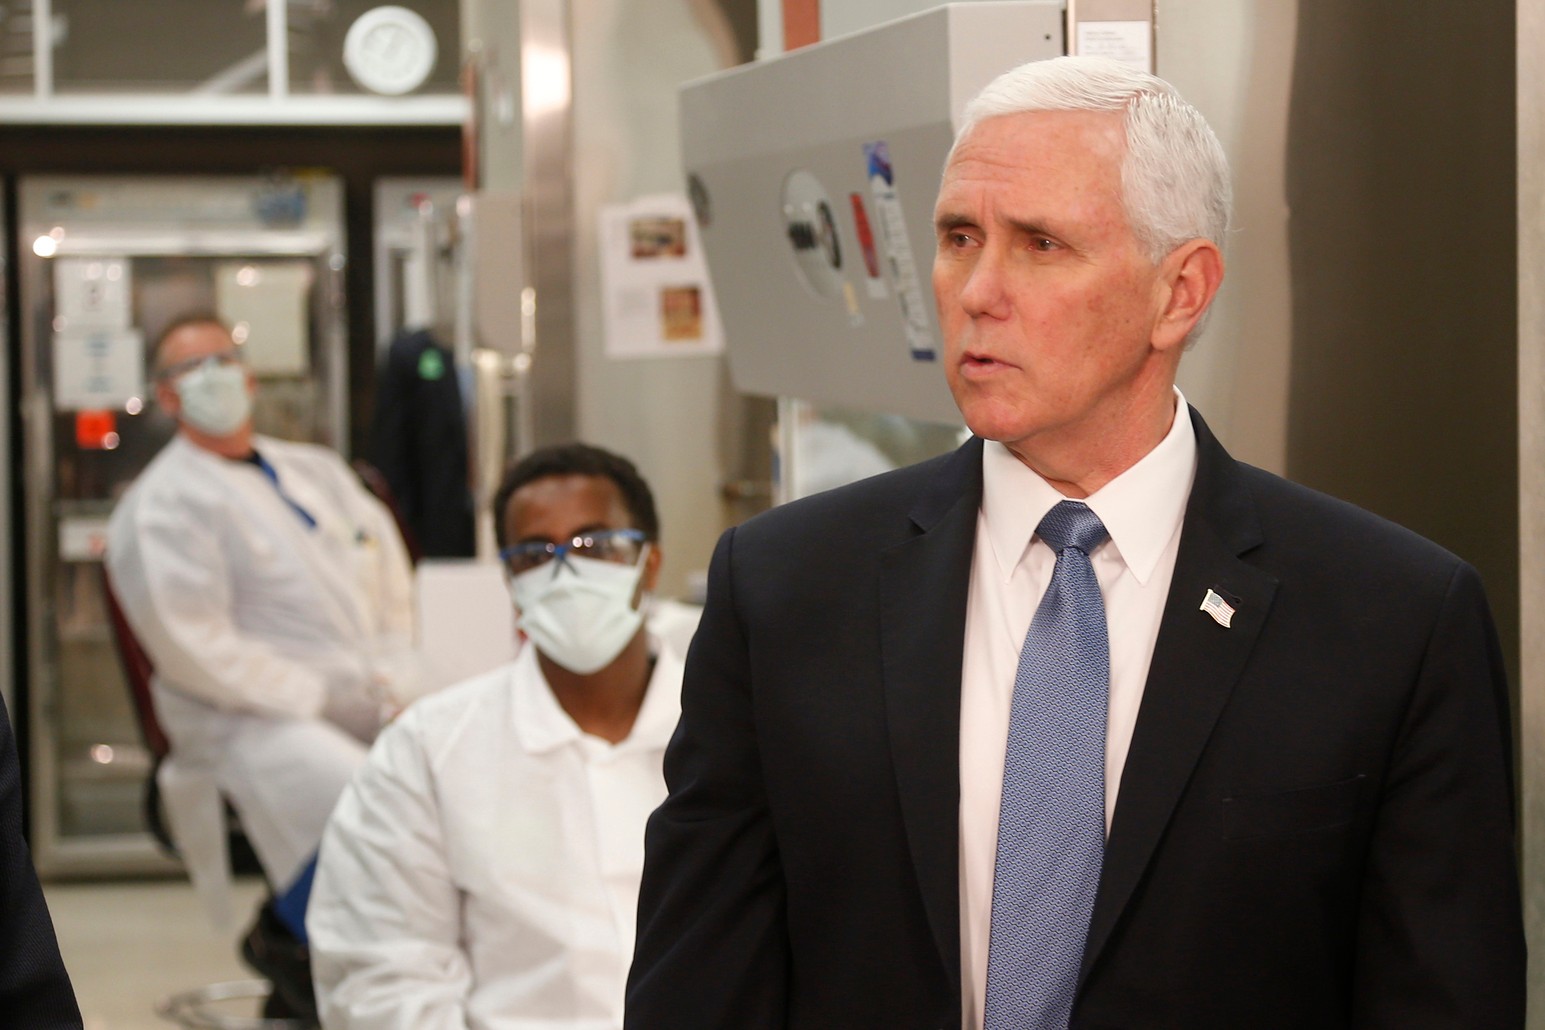 Vice President Mike Pence visits the molecular testing lab at Mayo Clinic Tuesday, April 28, 2020, in Rochester, Minn., where he toured the facilities supporting COVID-19 research and treatment. Pence chose not to wear a face mask while touring the Mayo Clinic in Minnesota. It's an apparent violation of the world-renowned medical center's policy requiring them. (AP Photo/Jim Mone)